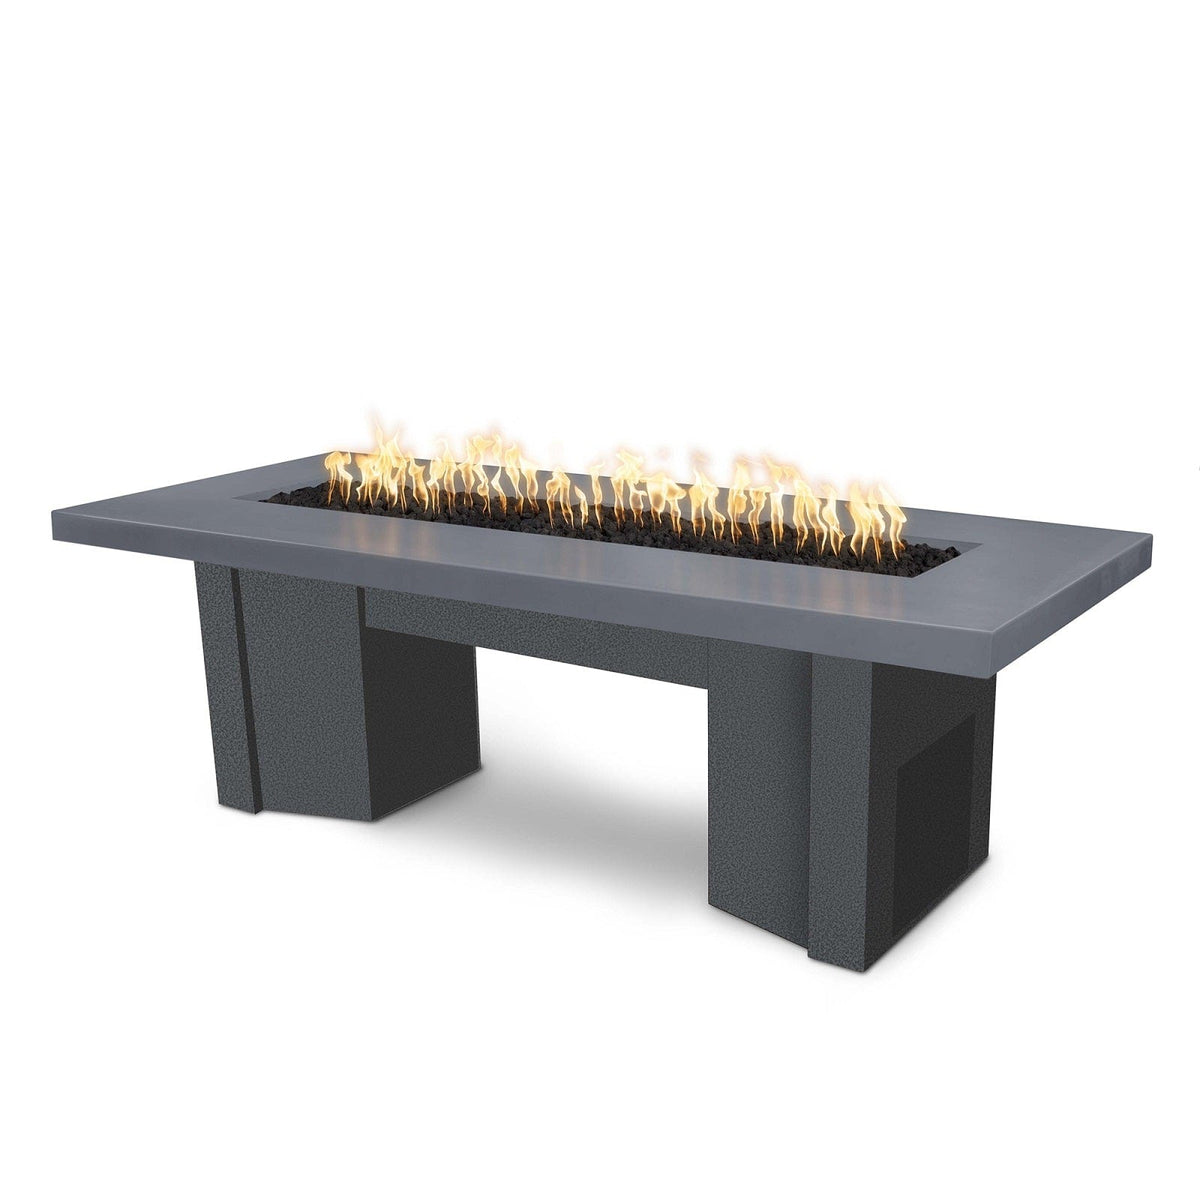 The Outdoor Plus Fire Features Gray (-GRY) / Silver Vein Powder Coated Steel (-SLV) The Outdoor Plus 60&quot; Alameda Fire Table Smooth Concrete in Natural Gas - 110V Plug &amp; Play Electronic Ignition / OPT-ALMGFRC60EKIT-NG